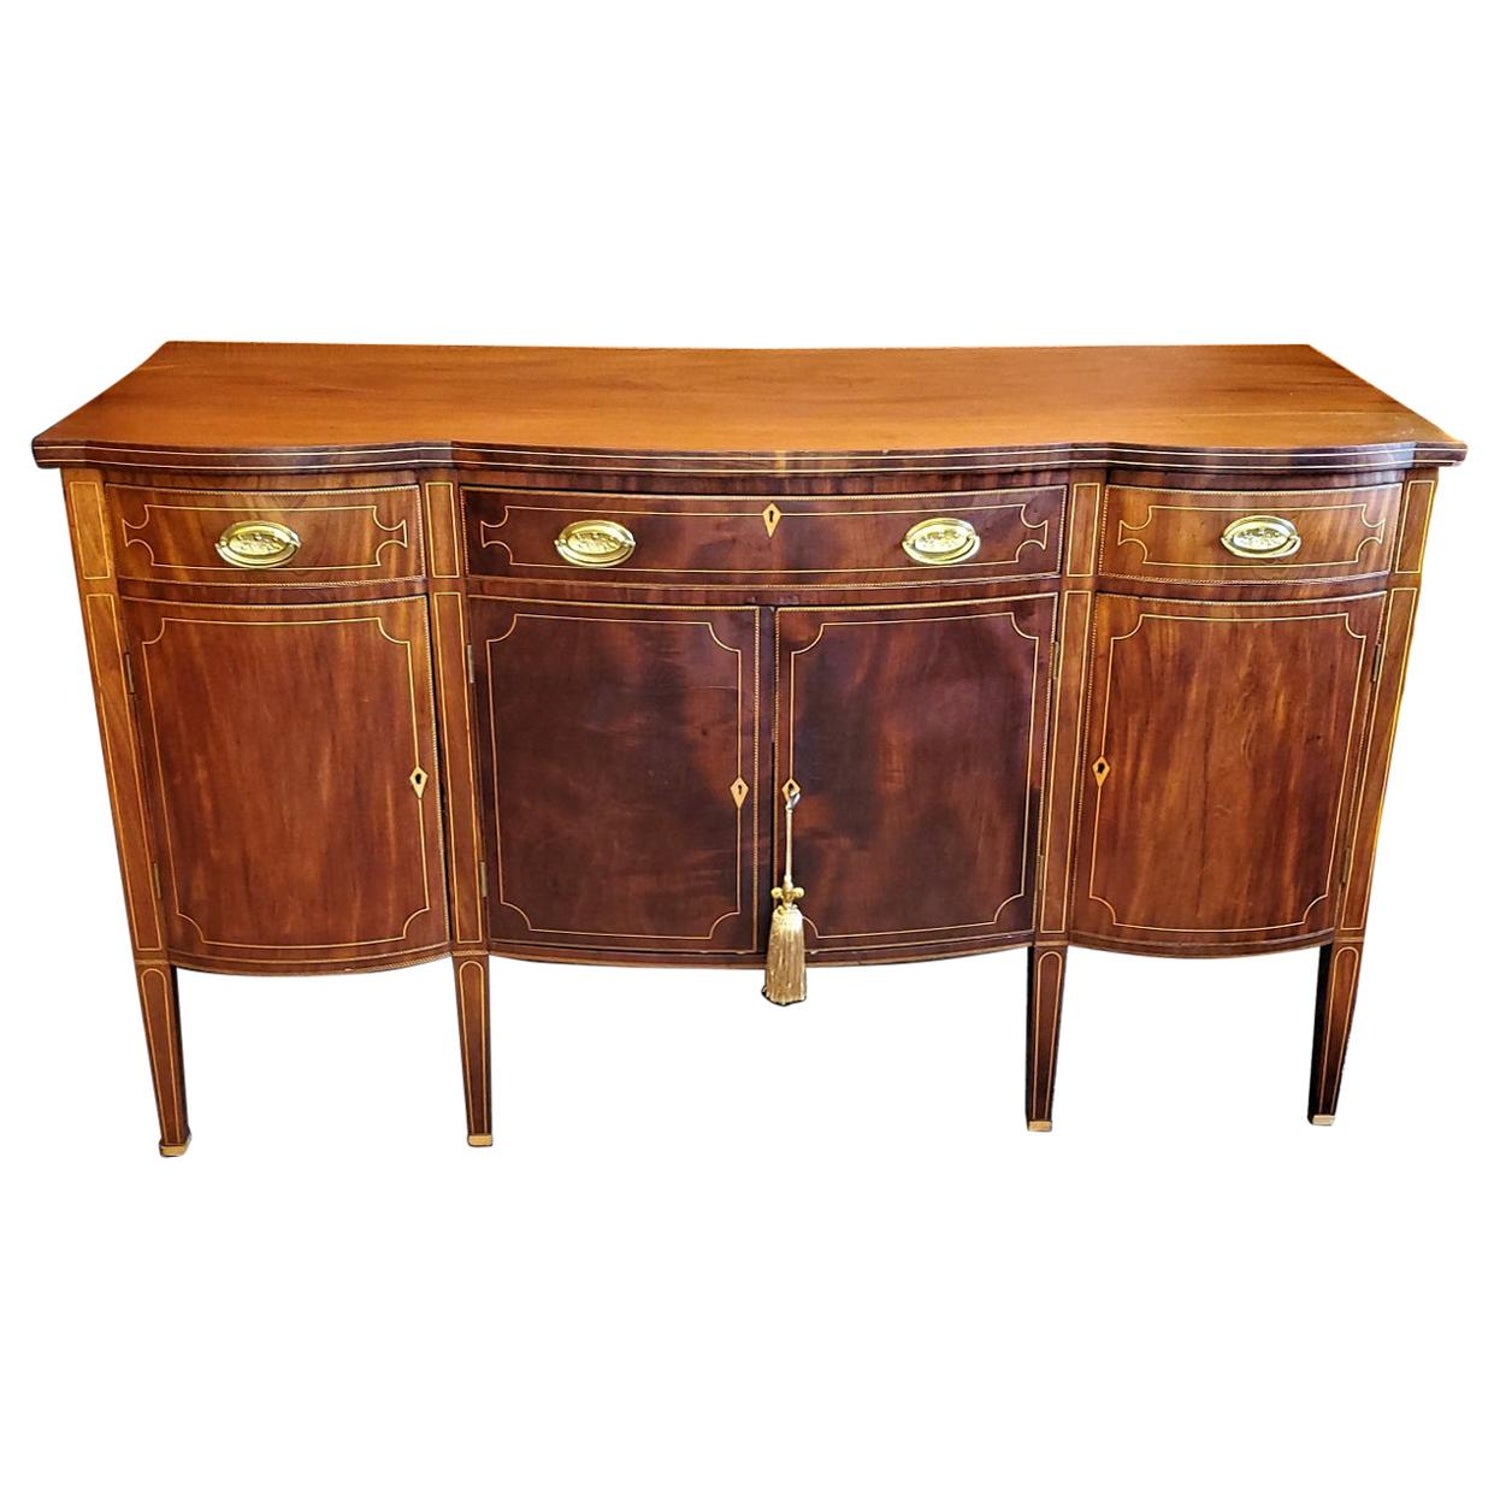 Early 19th C Sheraton Mahogany Sideboard with Gallery For Sale at 1stDibs |  sheridan sideboard, early american sideboard, antique sheraton sideboard